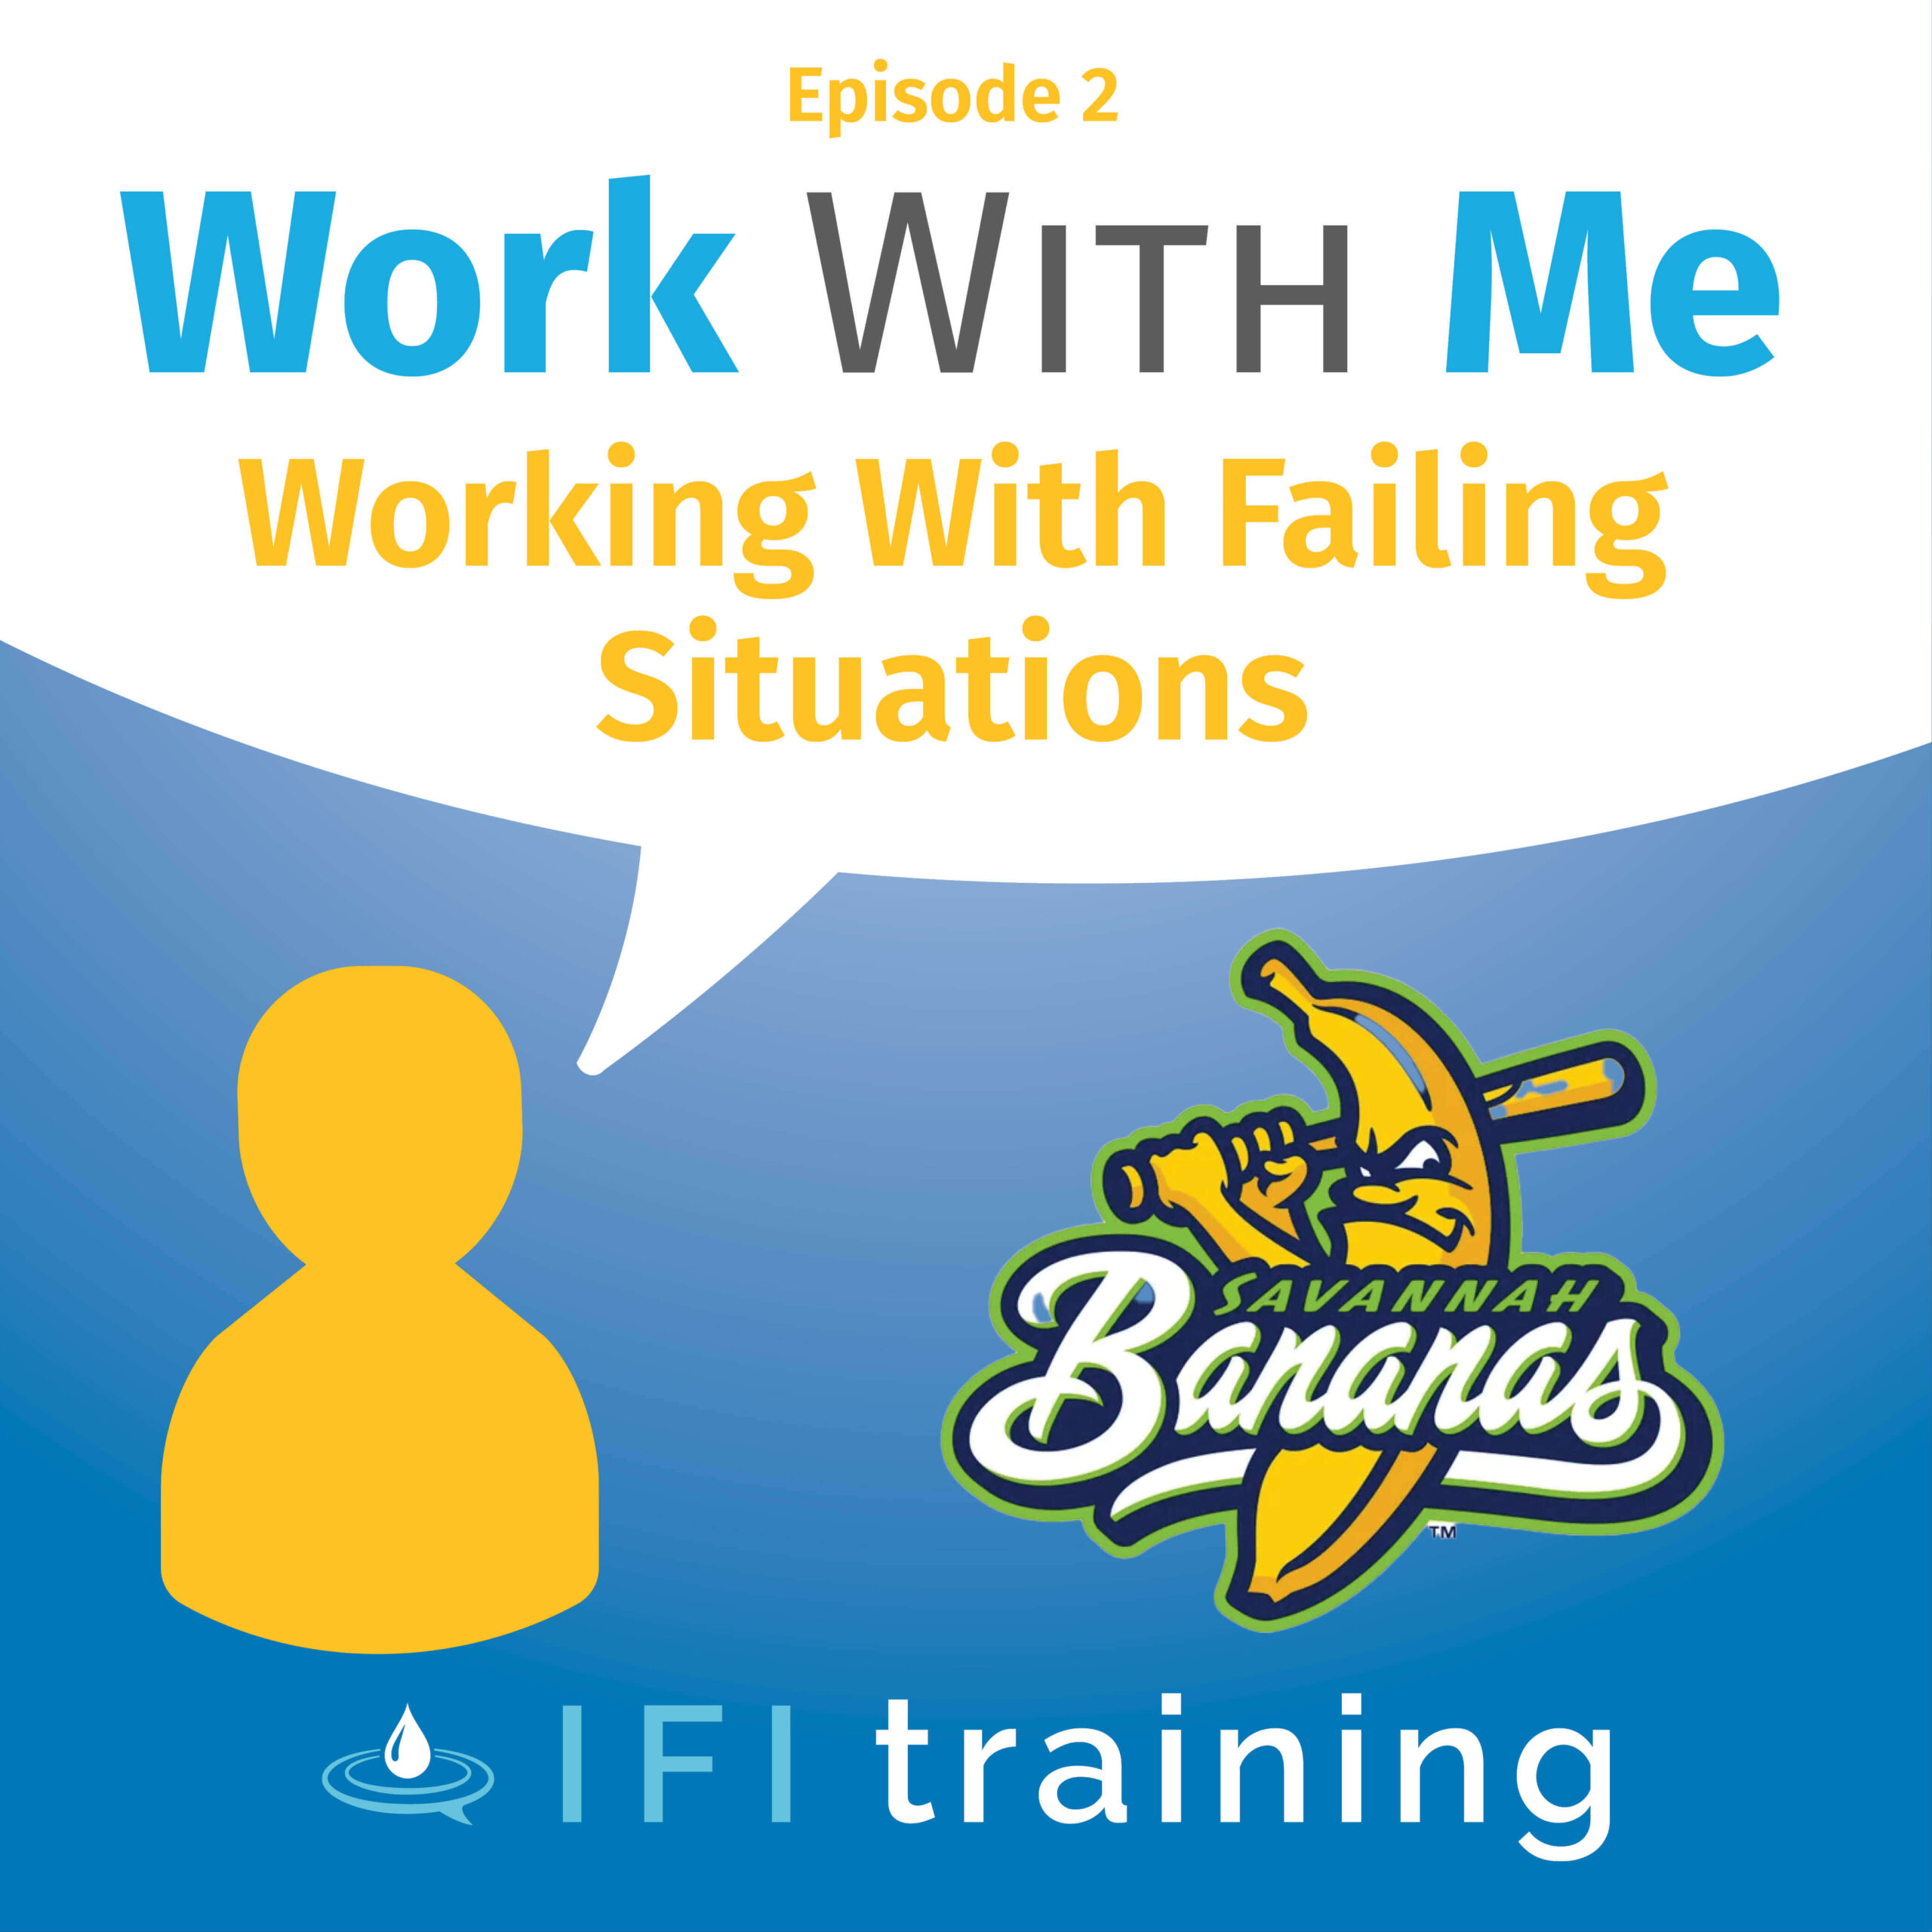 Episode Cover: Working with Failing Projects - The Savannah Bananas